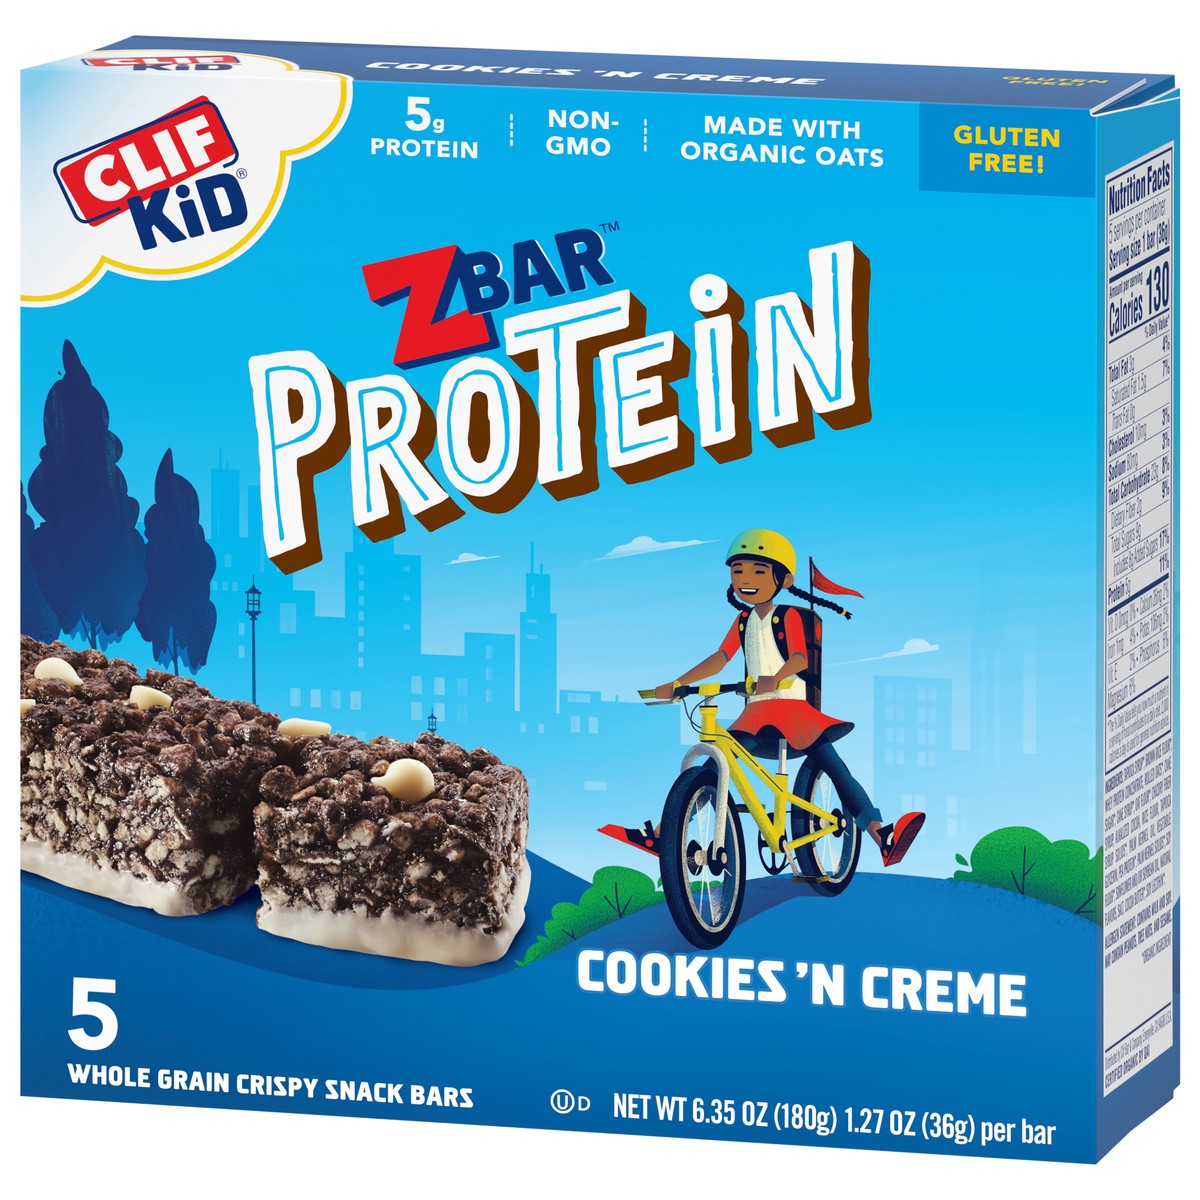 slide 3 of 9, Zbar Protein - Cookies 'n Creme - Crispy Whole Grain Snack Bars - Made with Organic Oats - Non-GMO - 5g Protein - 1.27 oz. (5 Pack), 5 ct; 6.35 oz